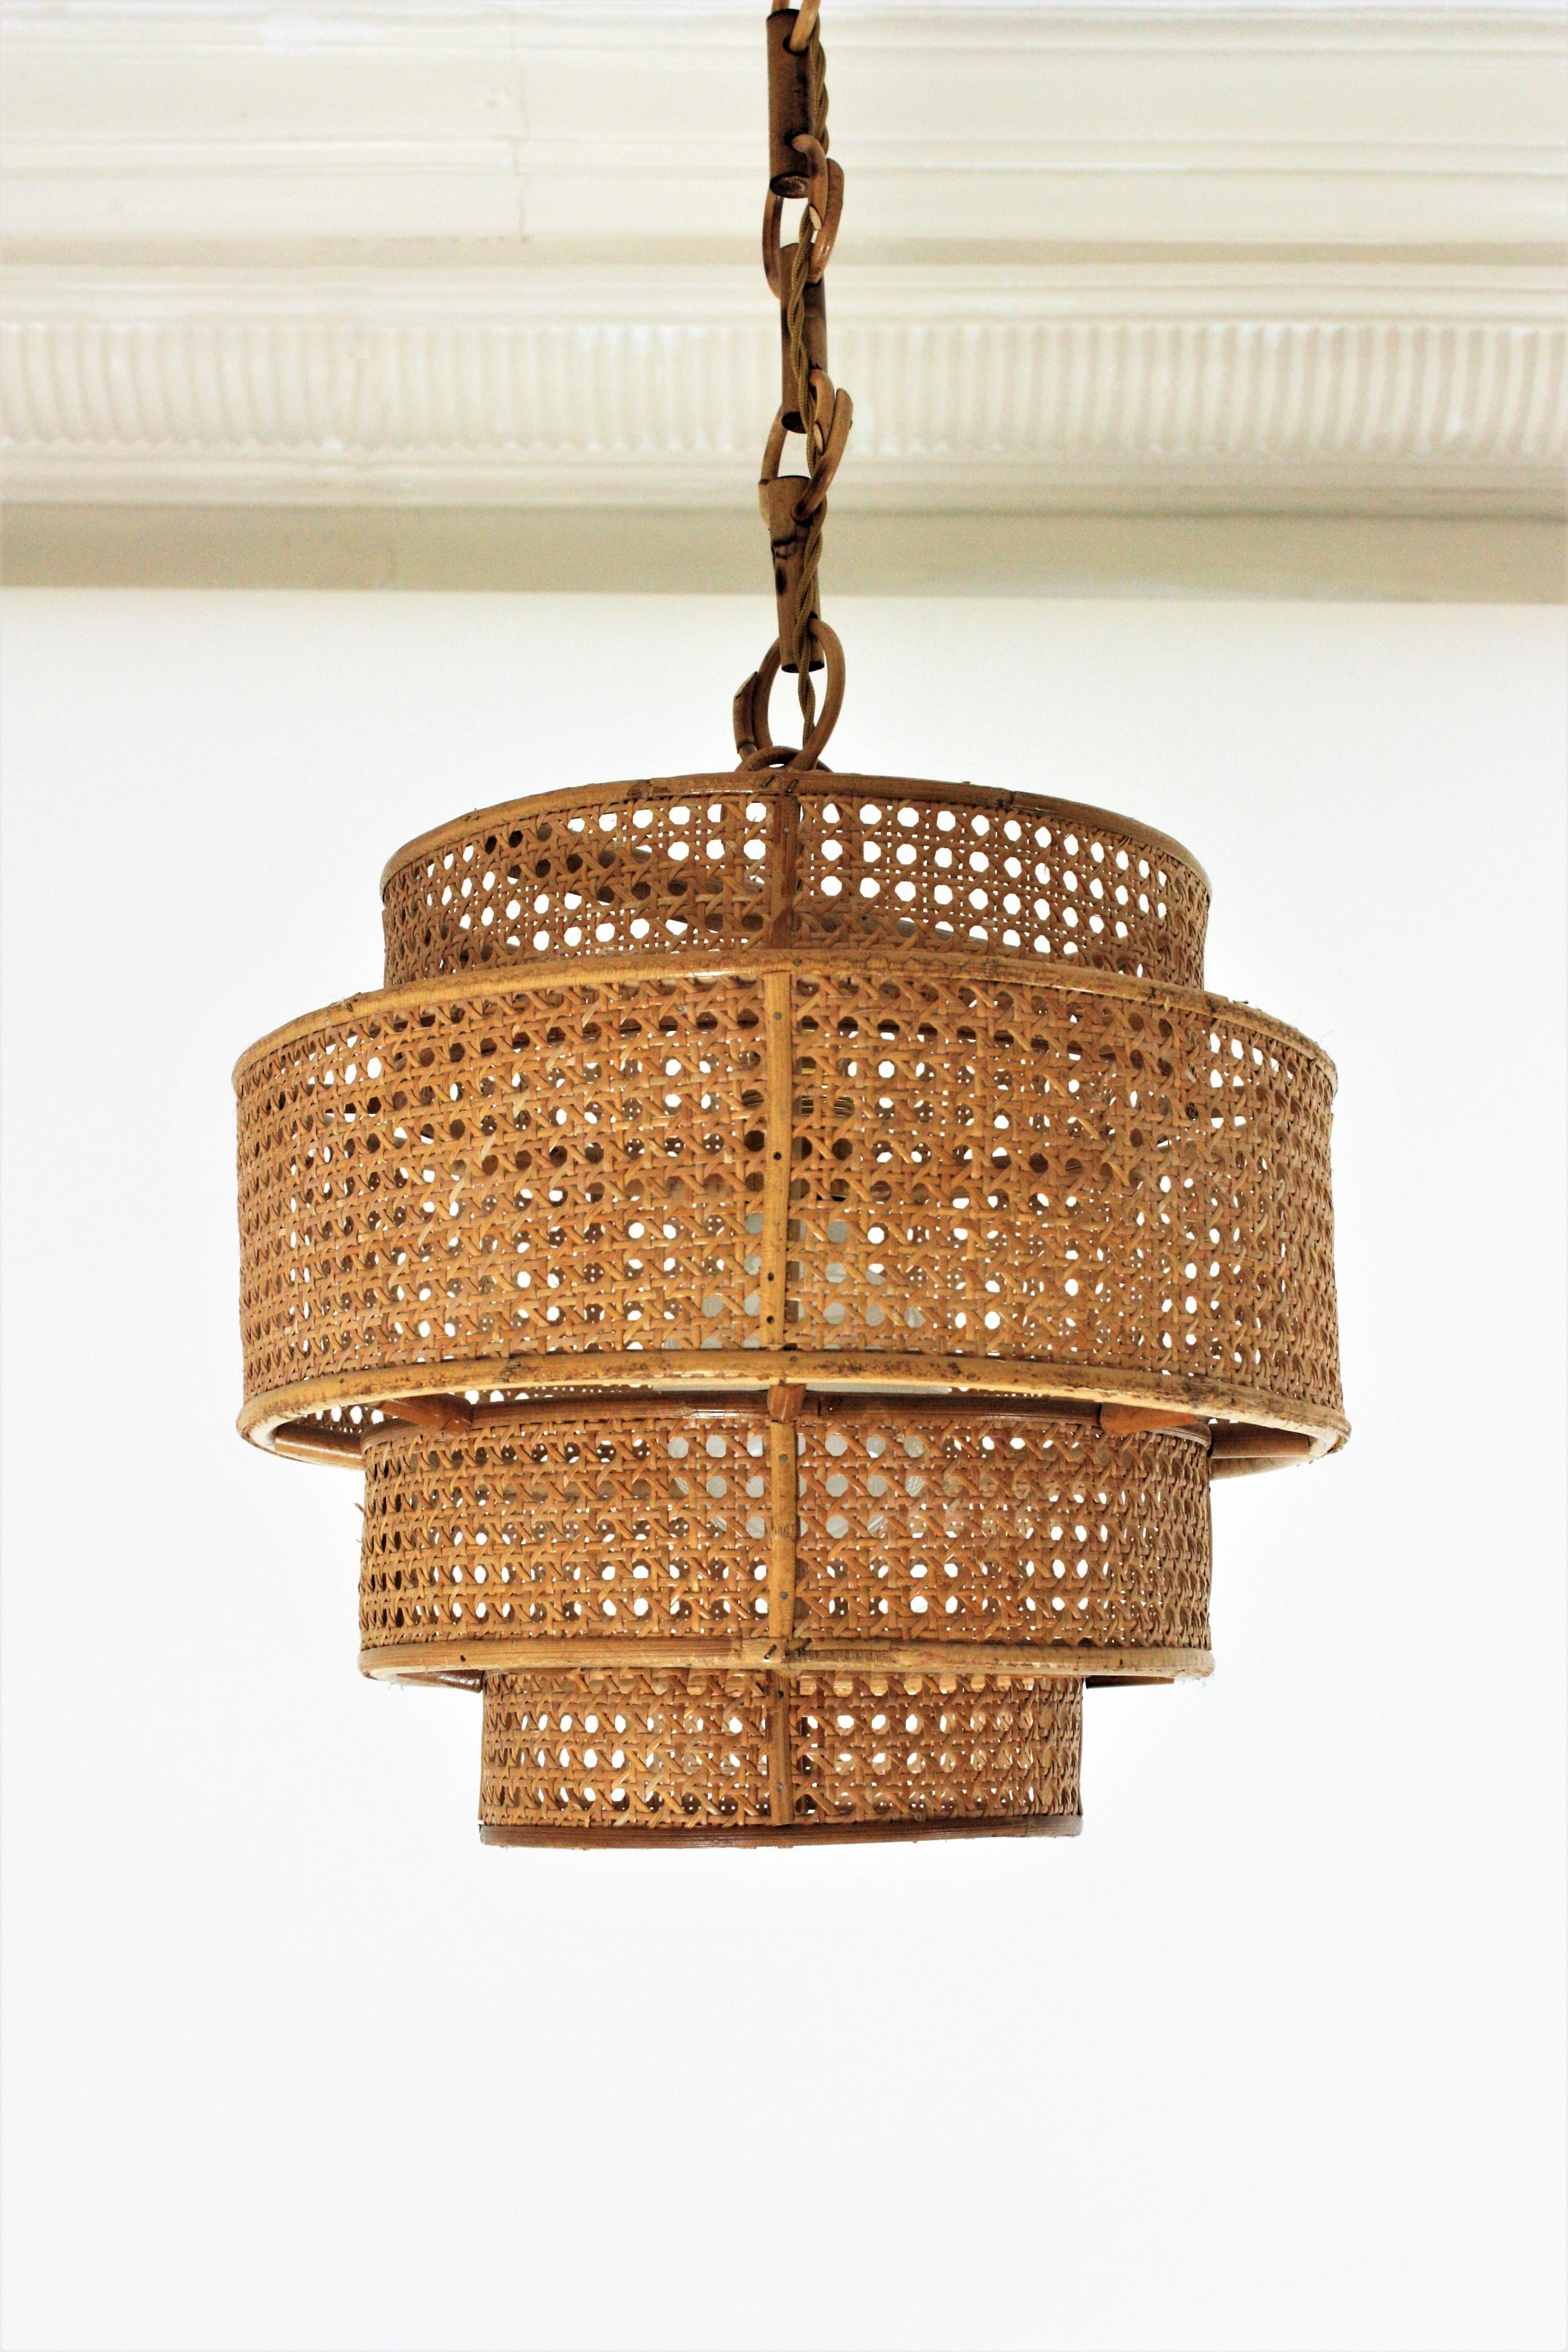  Rattan Wicker Weave Concentric Cylinder Pendant Hanging Light  For Sale 5